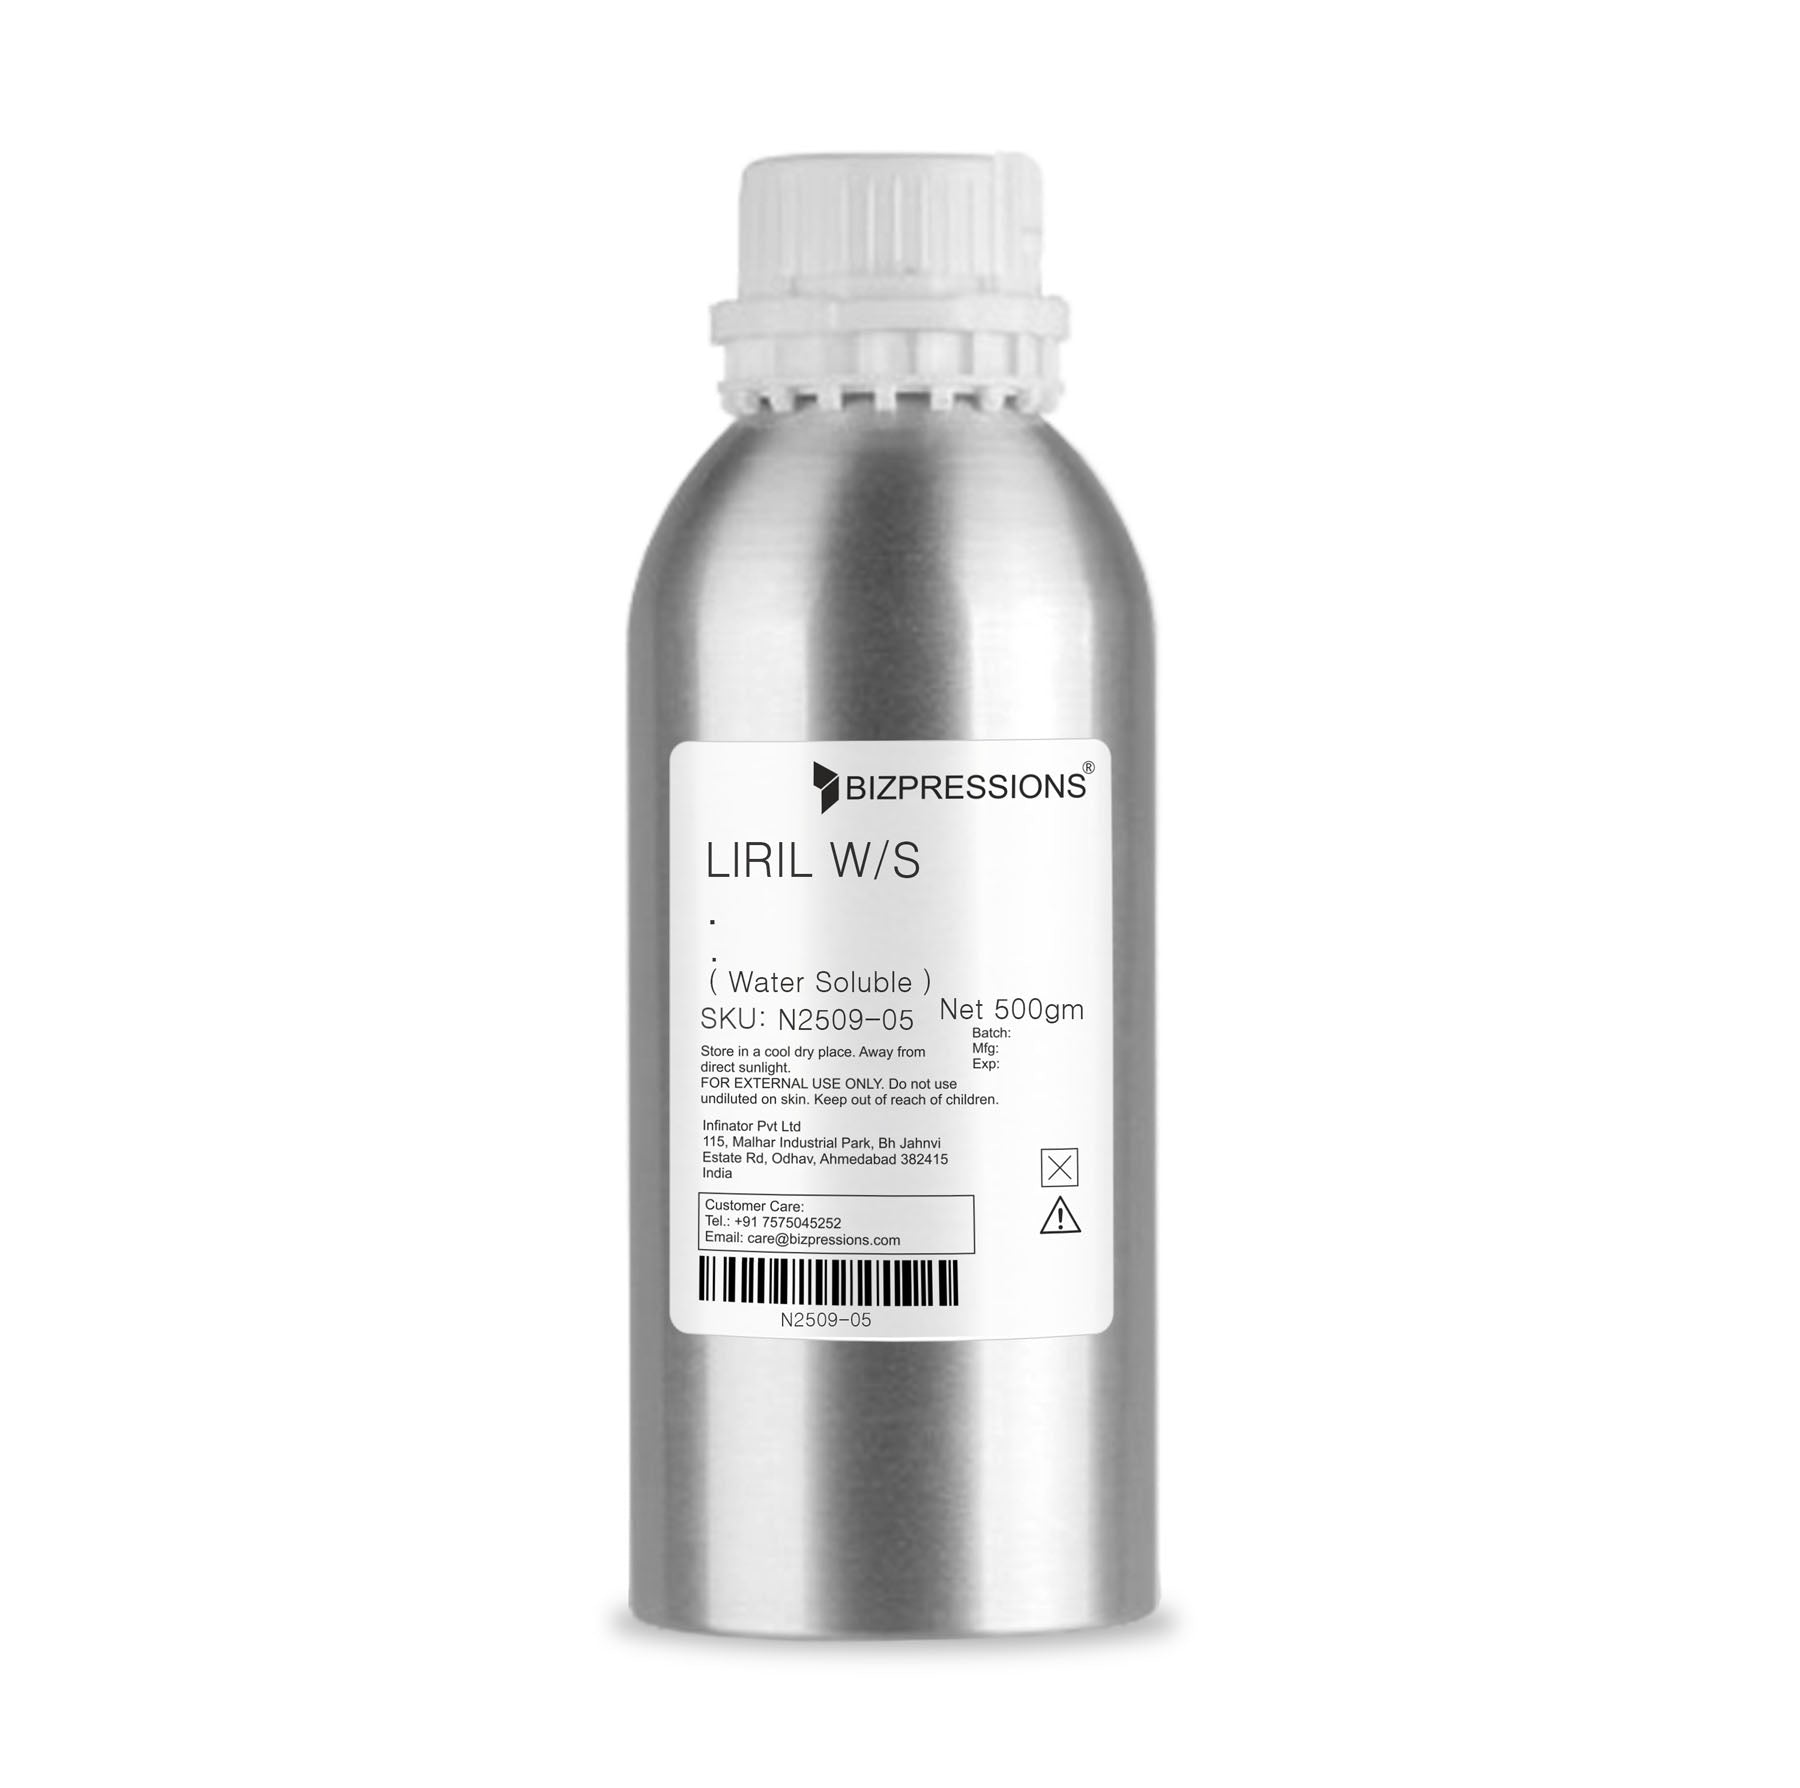 LIRIL W/S - Fragrance ( Water Soluble ) - 500 gm